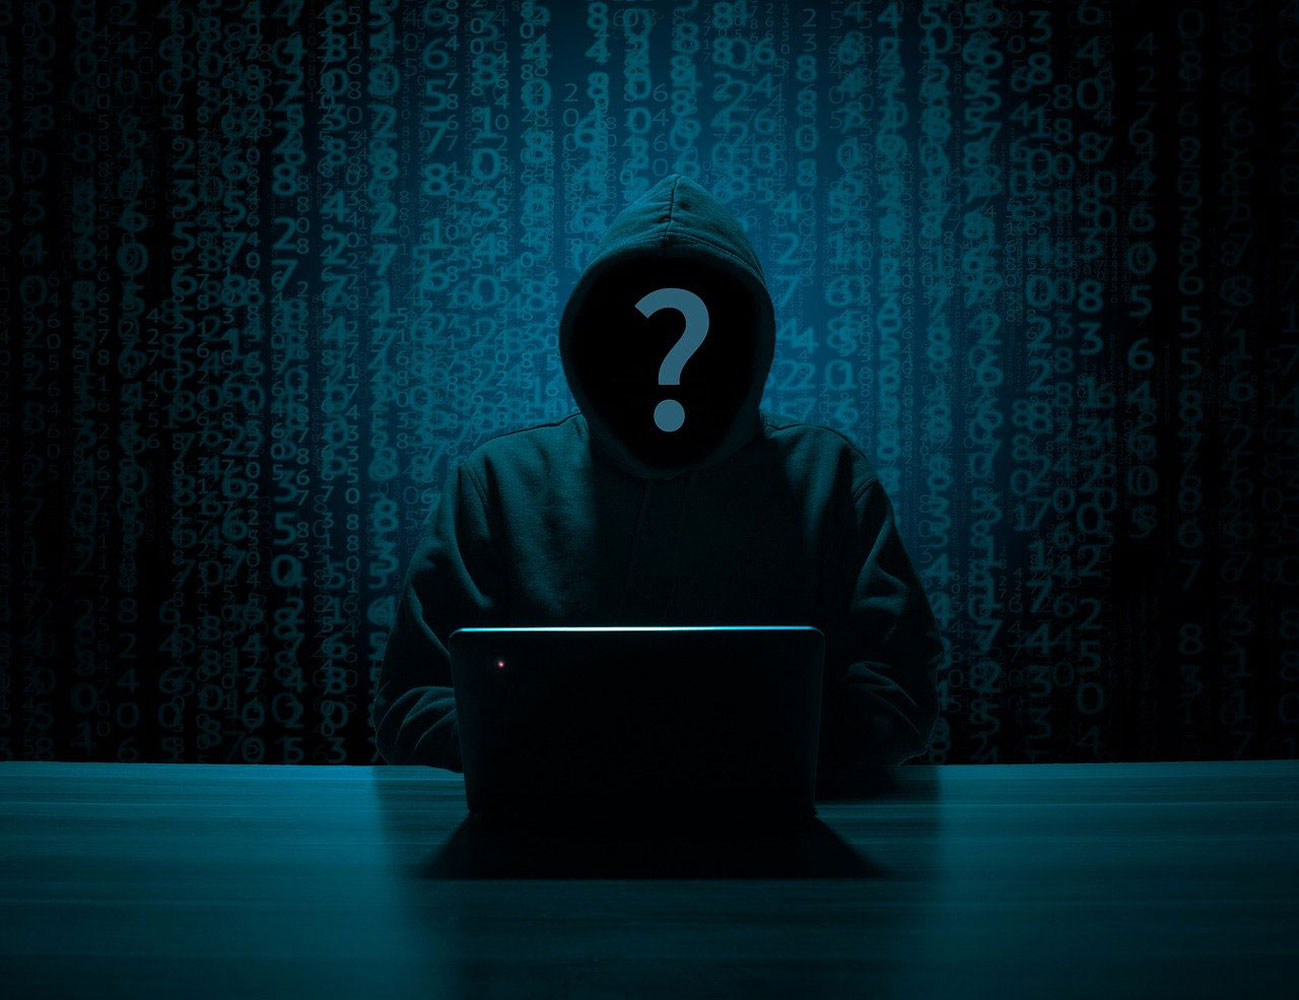 The photo shows a silhouette of a person in a black hoodie in front of a laptop. The background shows coding in a blue color showing the person is up to no good. The photo is a representation of a person violating another persons security on video conference calls.